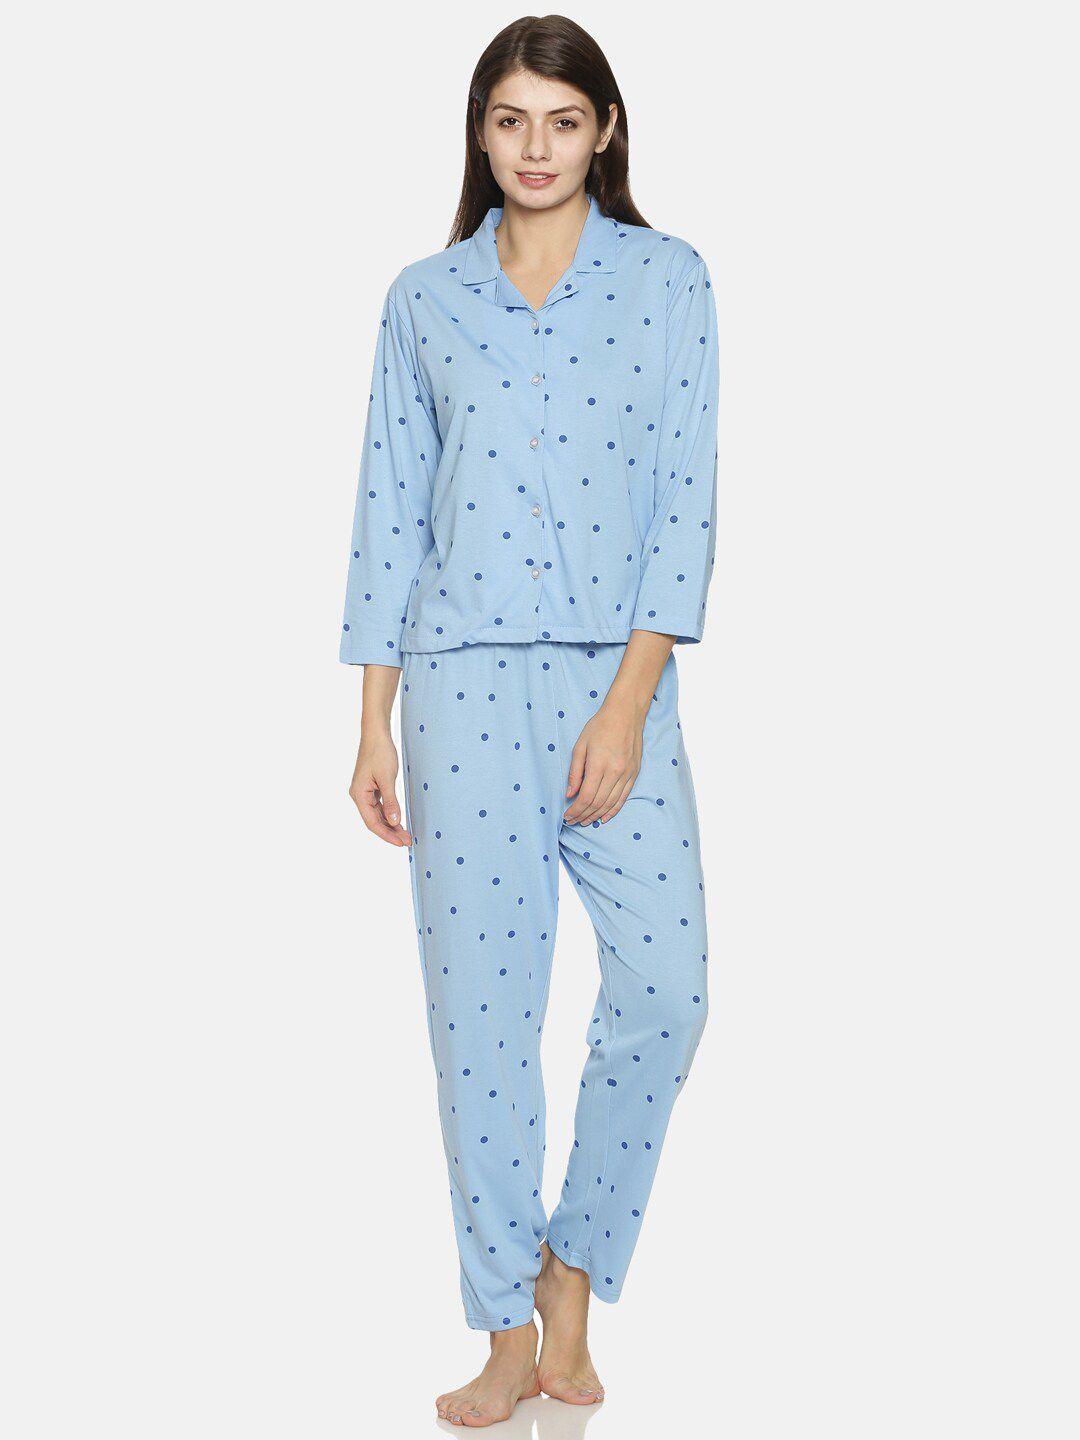 campus sutra women blue polka dot printed cotton night suit